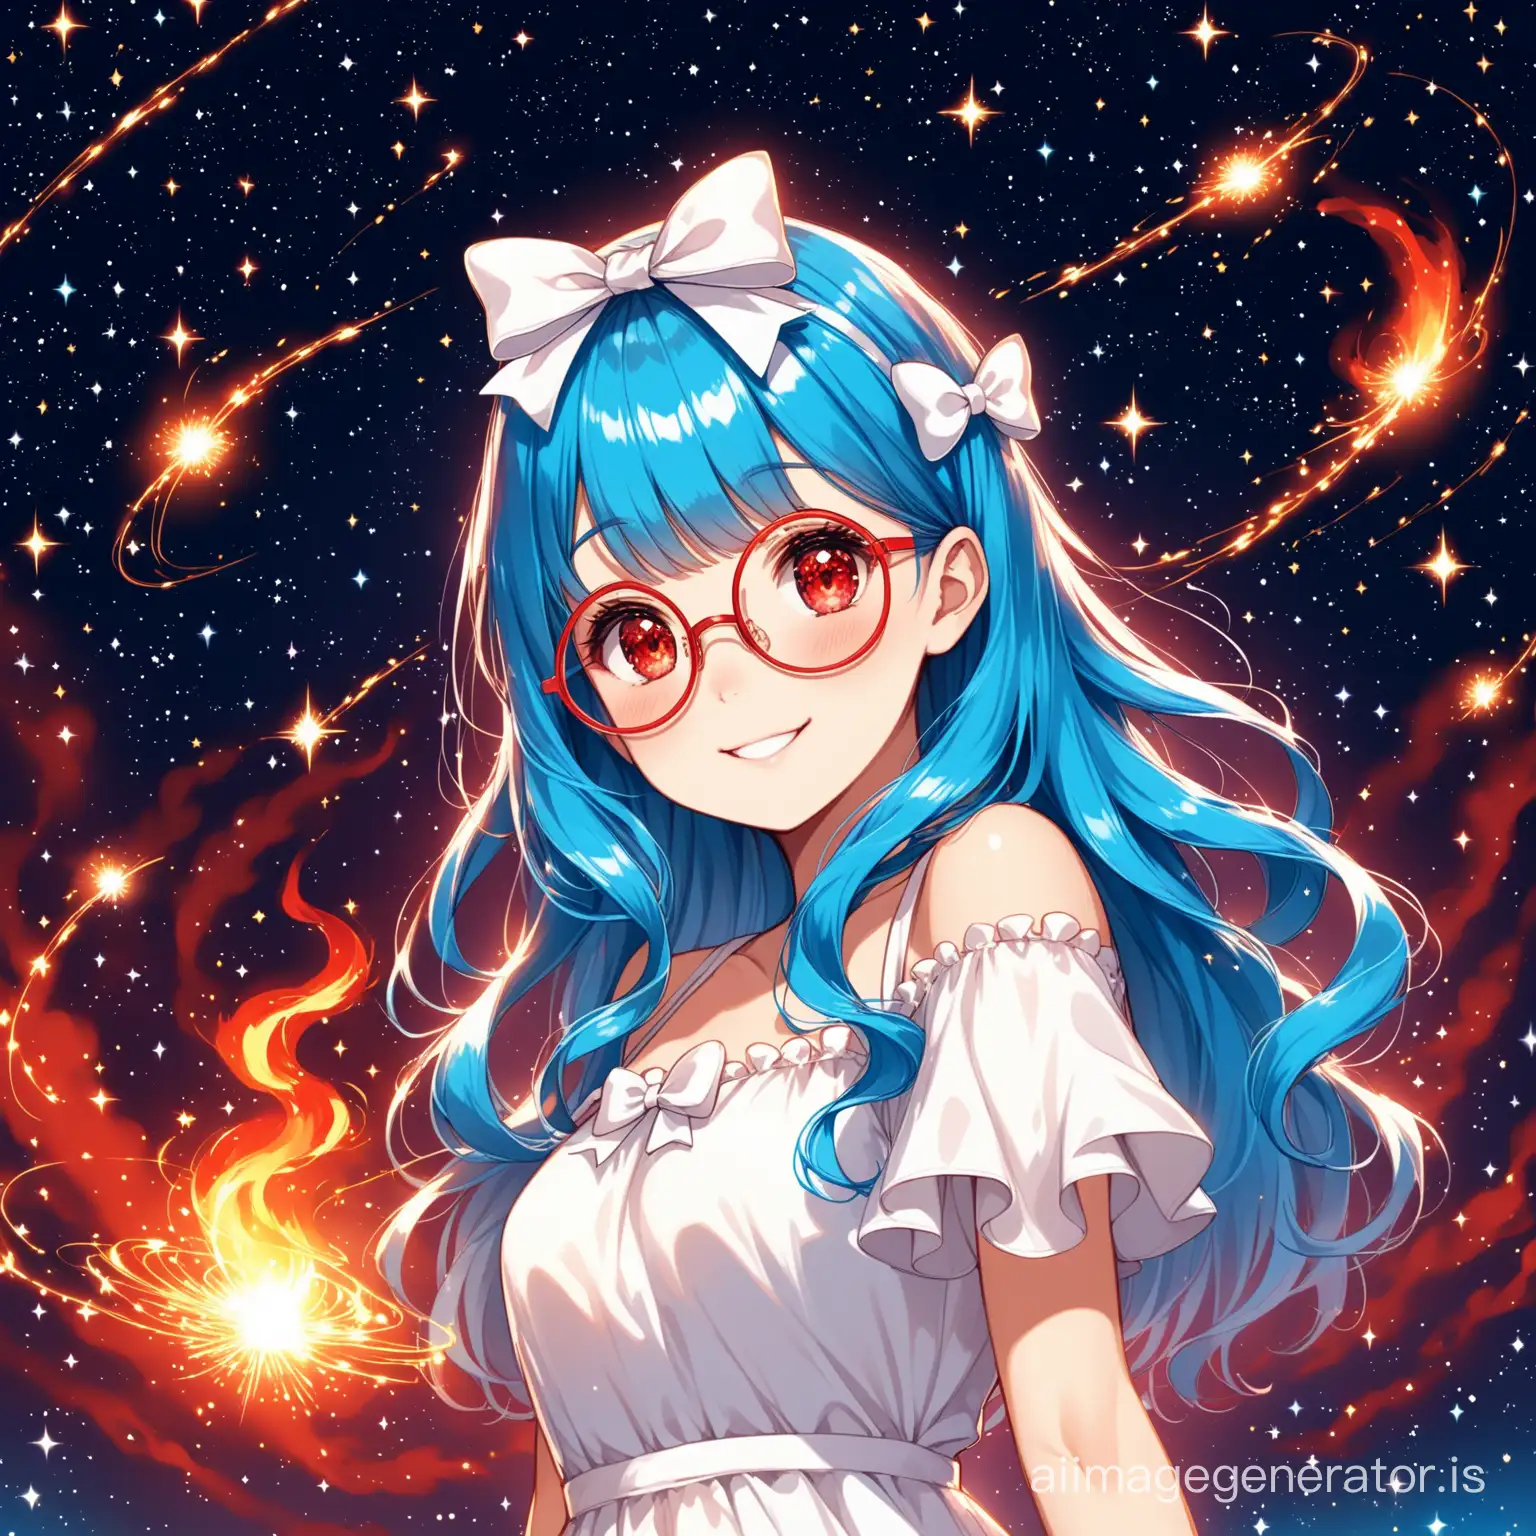 Smiling-Girl-with-Blue-Hair-and-Red-Accents-in-Starry-Galaxy-Background